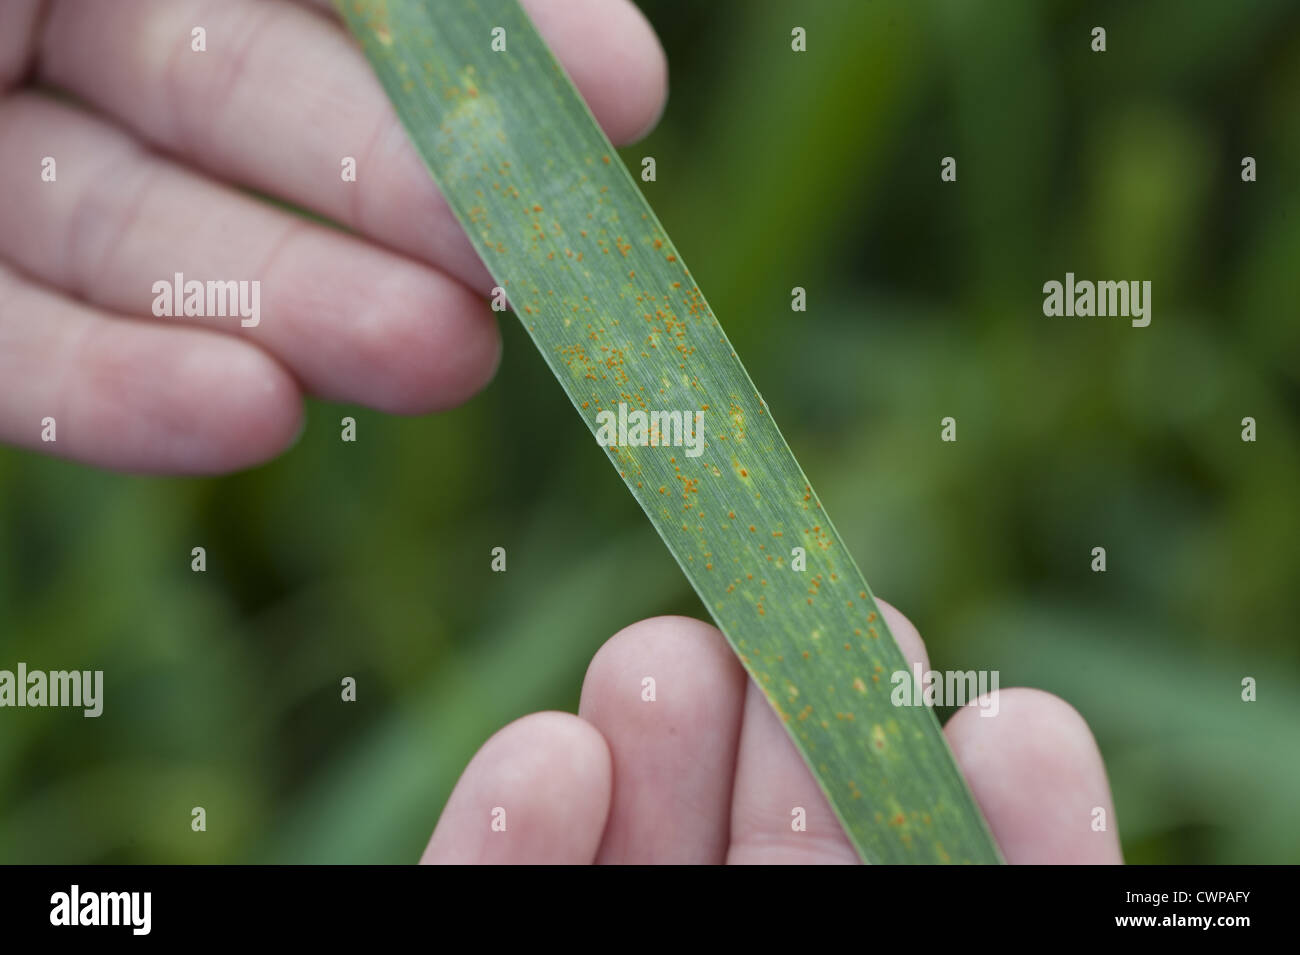 Wheat (Triticum aestivum) crop, leaf infected with Brown Rust (Puccinia recondita) fungal disease, Lincolnshire, England, june Stock Photo